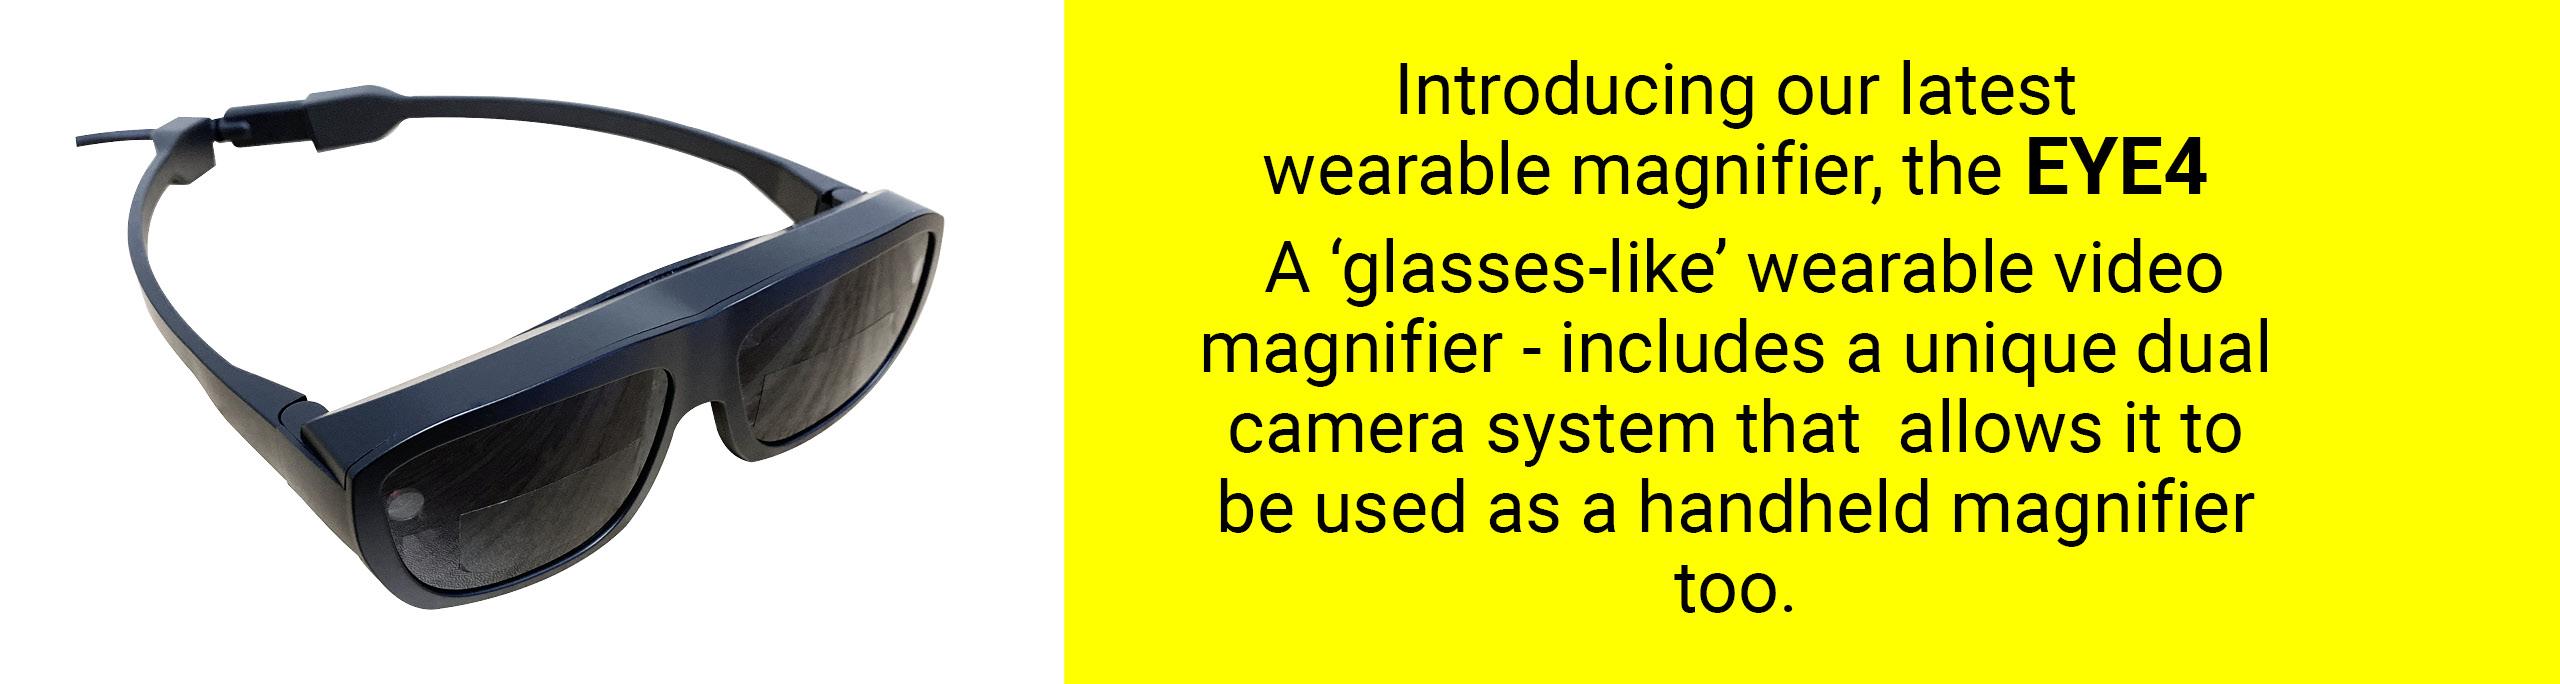 Introducing our latest wearable magnifier, the EYE4